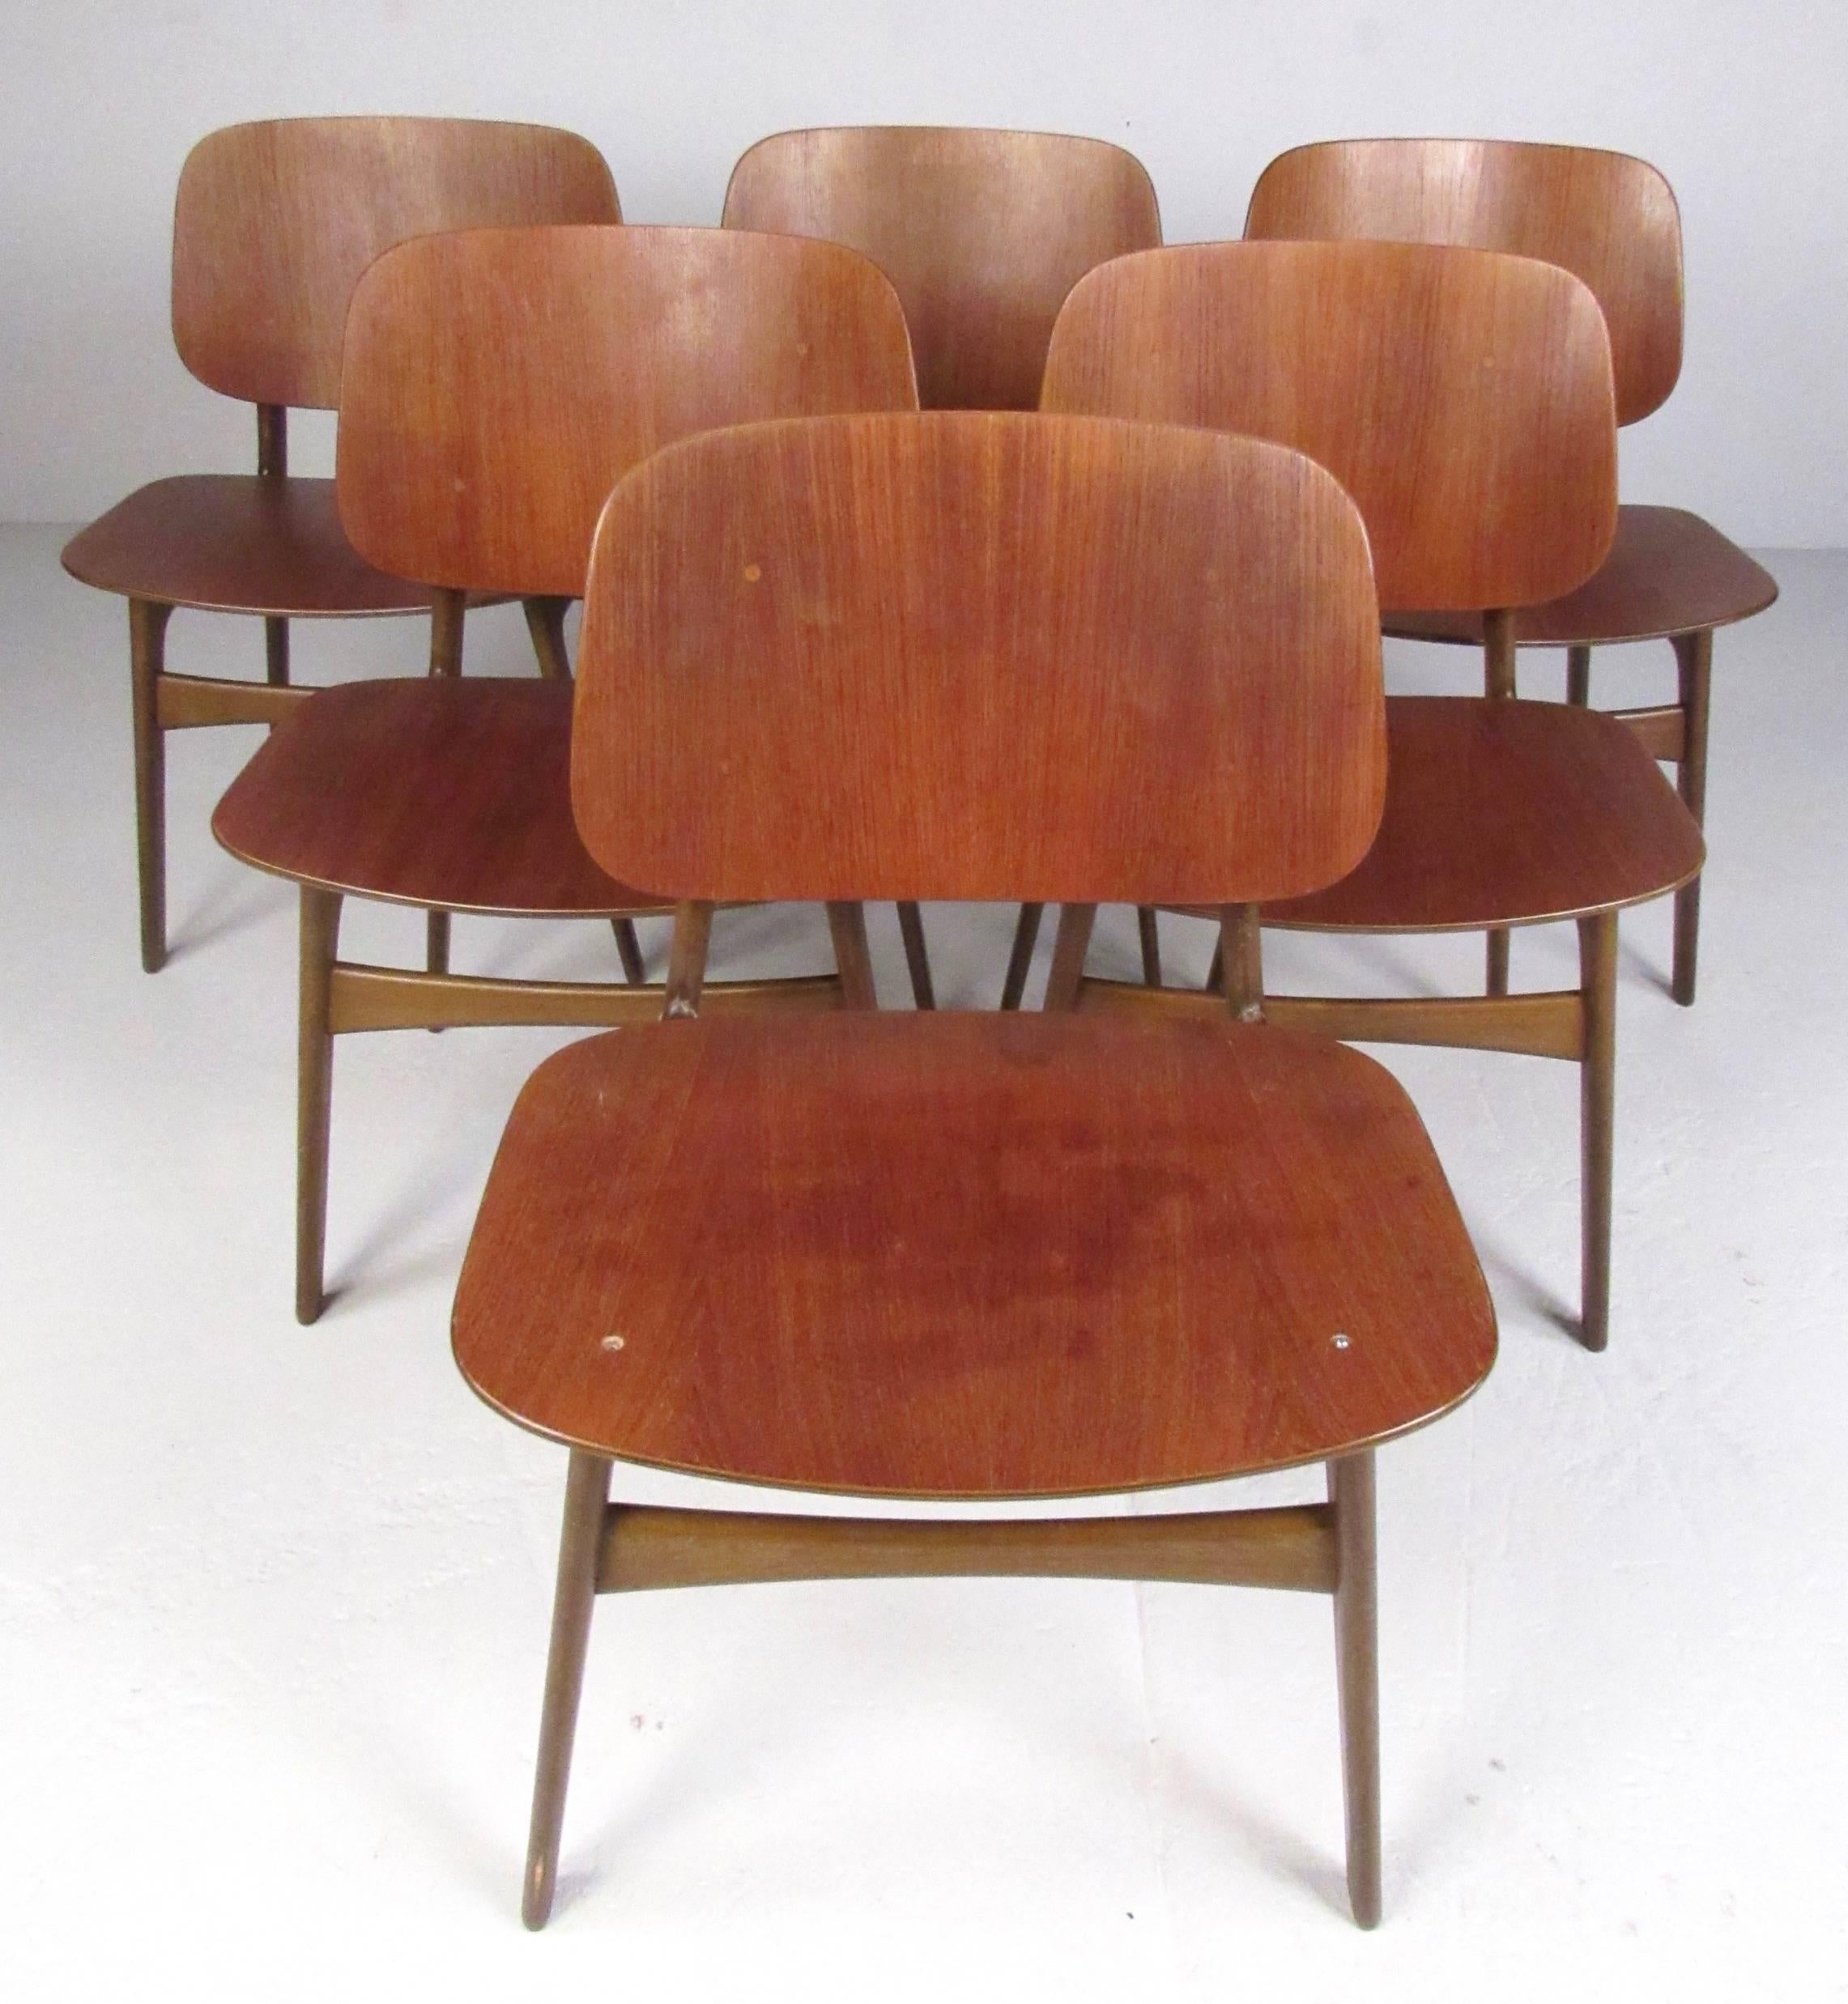 This beautiful set of six dining chairs feature Danish modern design, comfortable sculpted seats, and Mid-Century frames. The stylish mix of teak and walnut make this unique set of chairs an impressive addition to any dining room. Please confirm